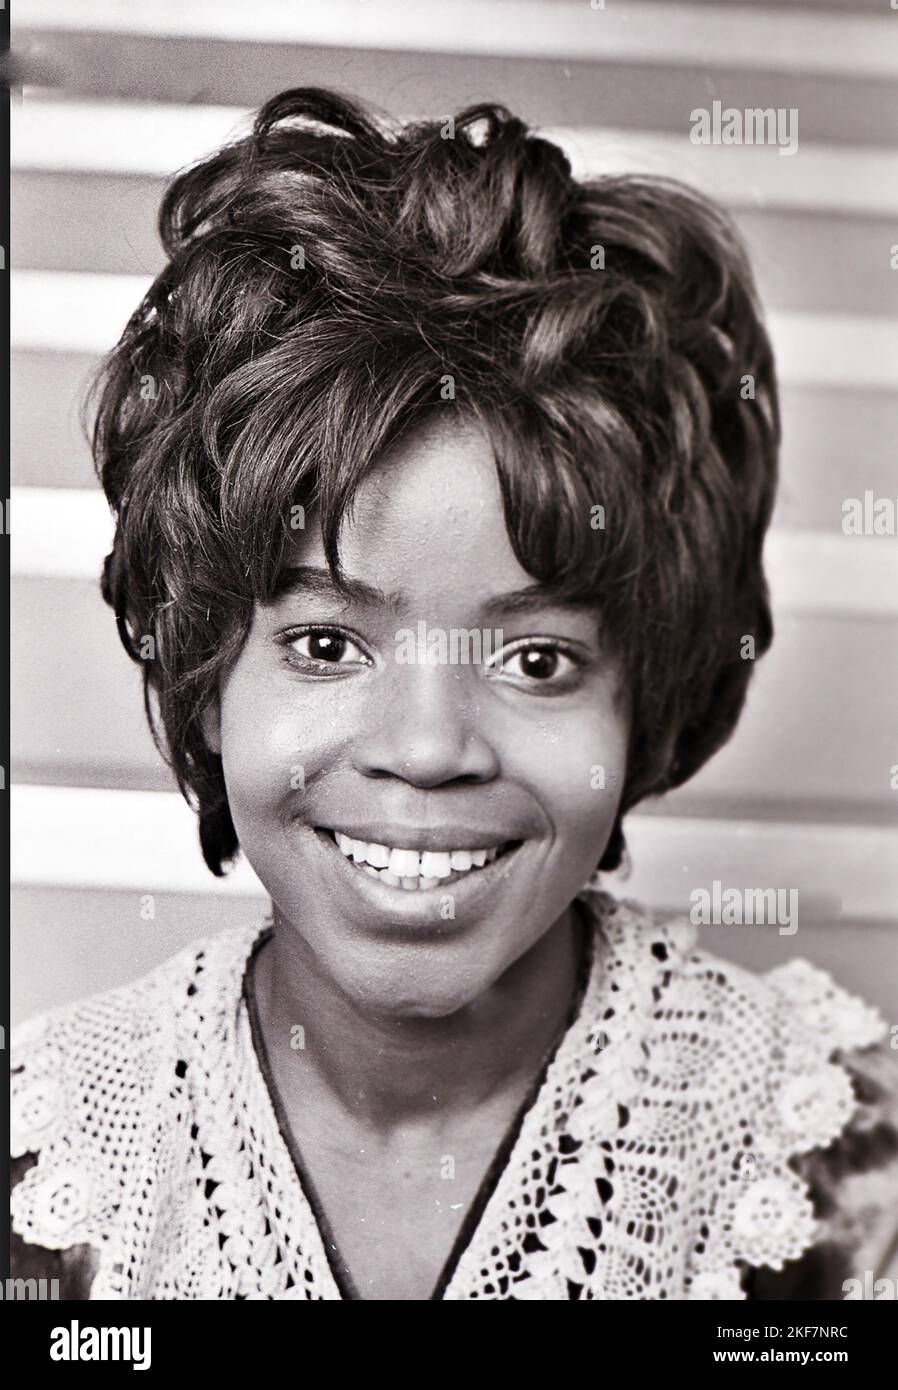 P.P. ARNOLD American Soul singer in January 1968. Photo: Tony Gale Stock Photo